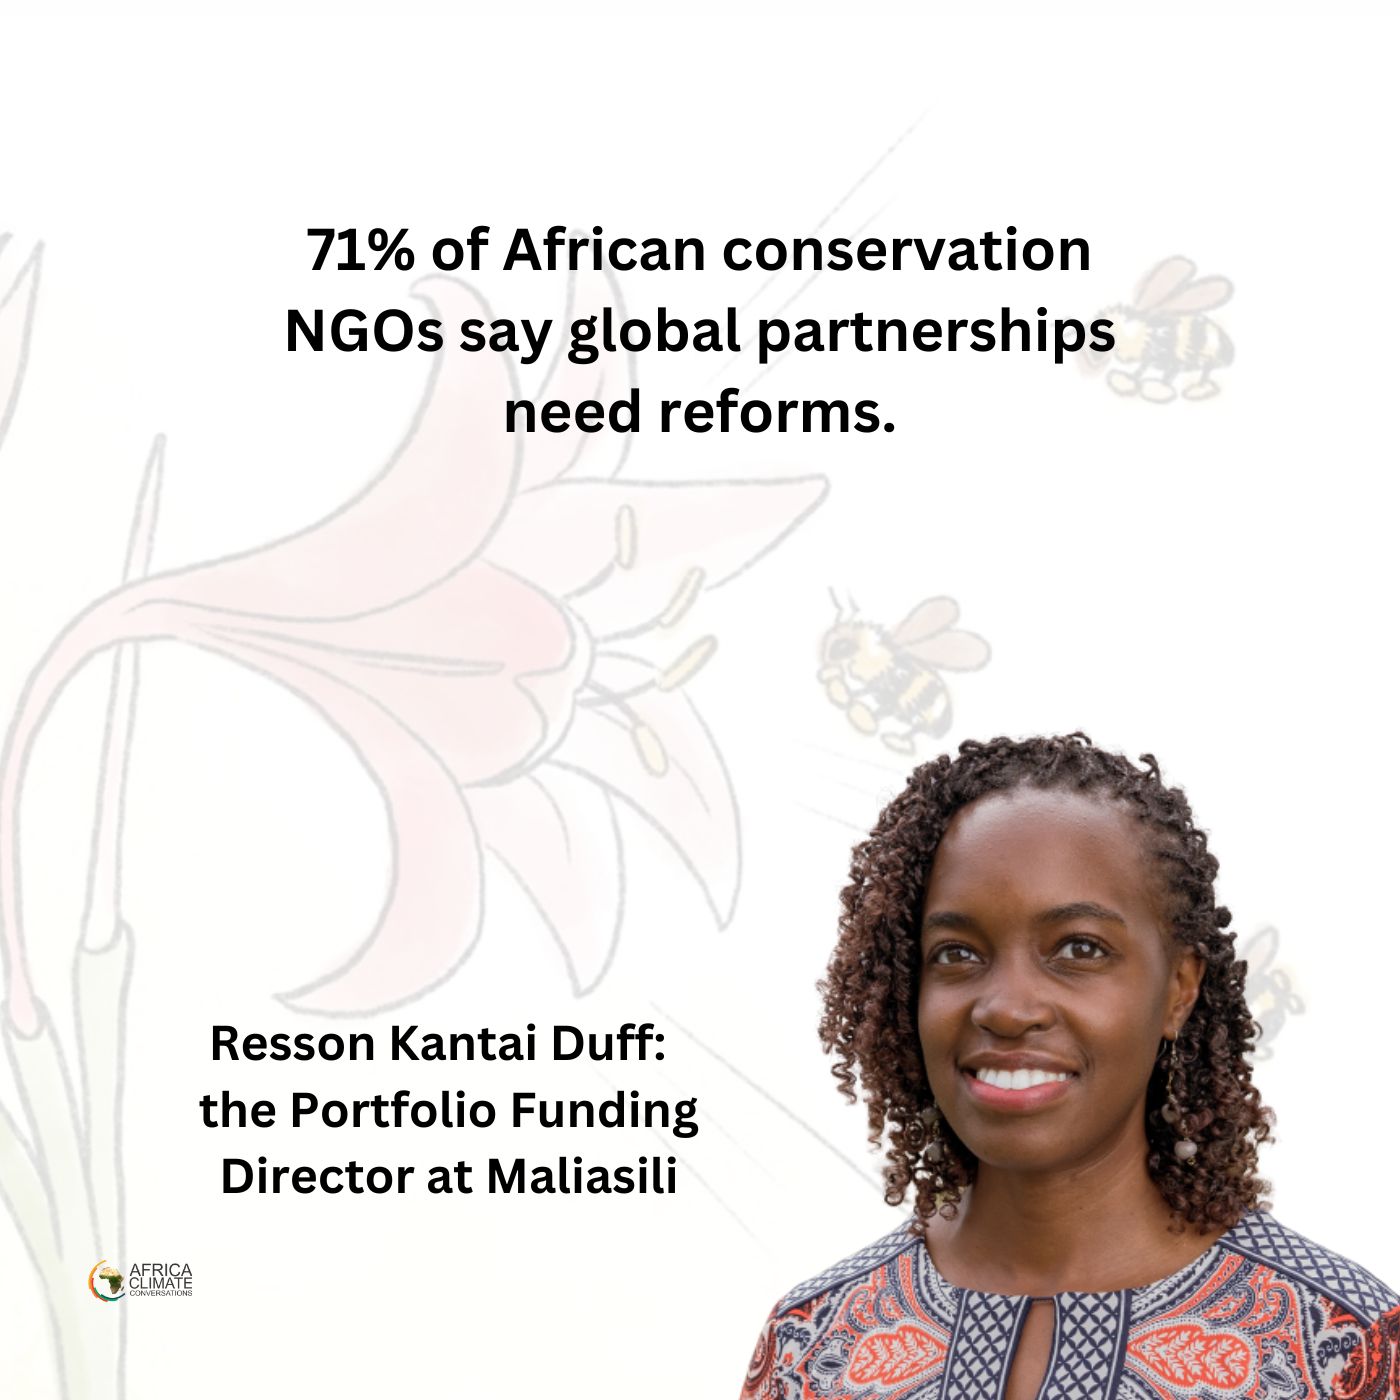 71% of African conservation NGOs say global partnerships need reforms.